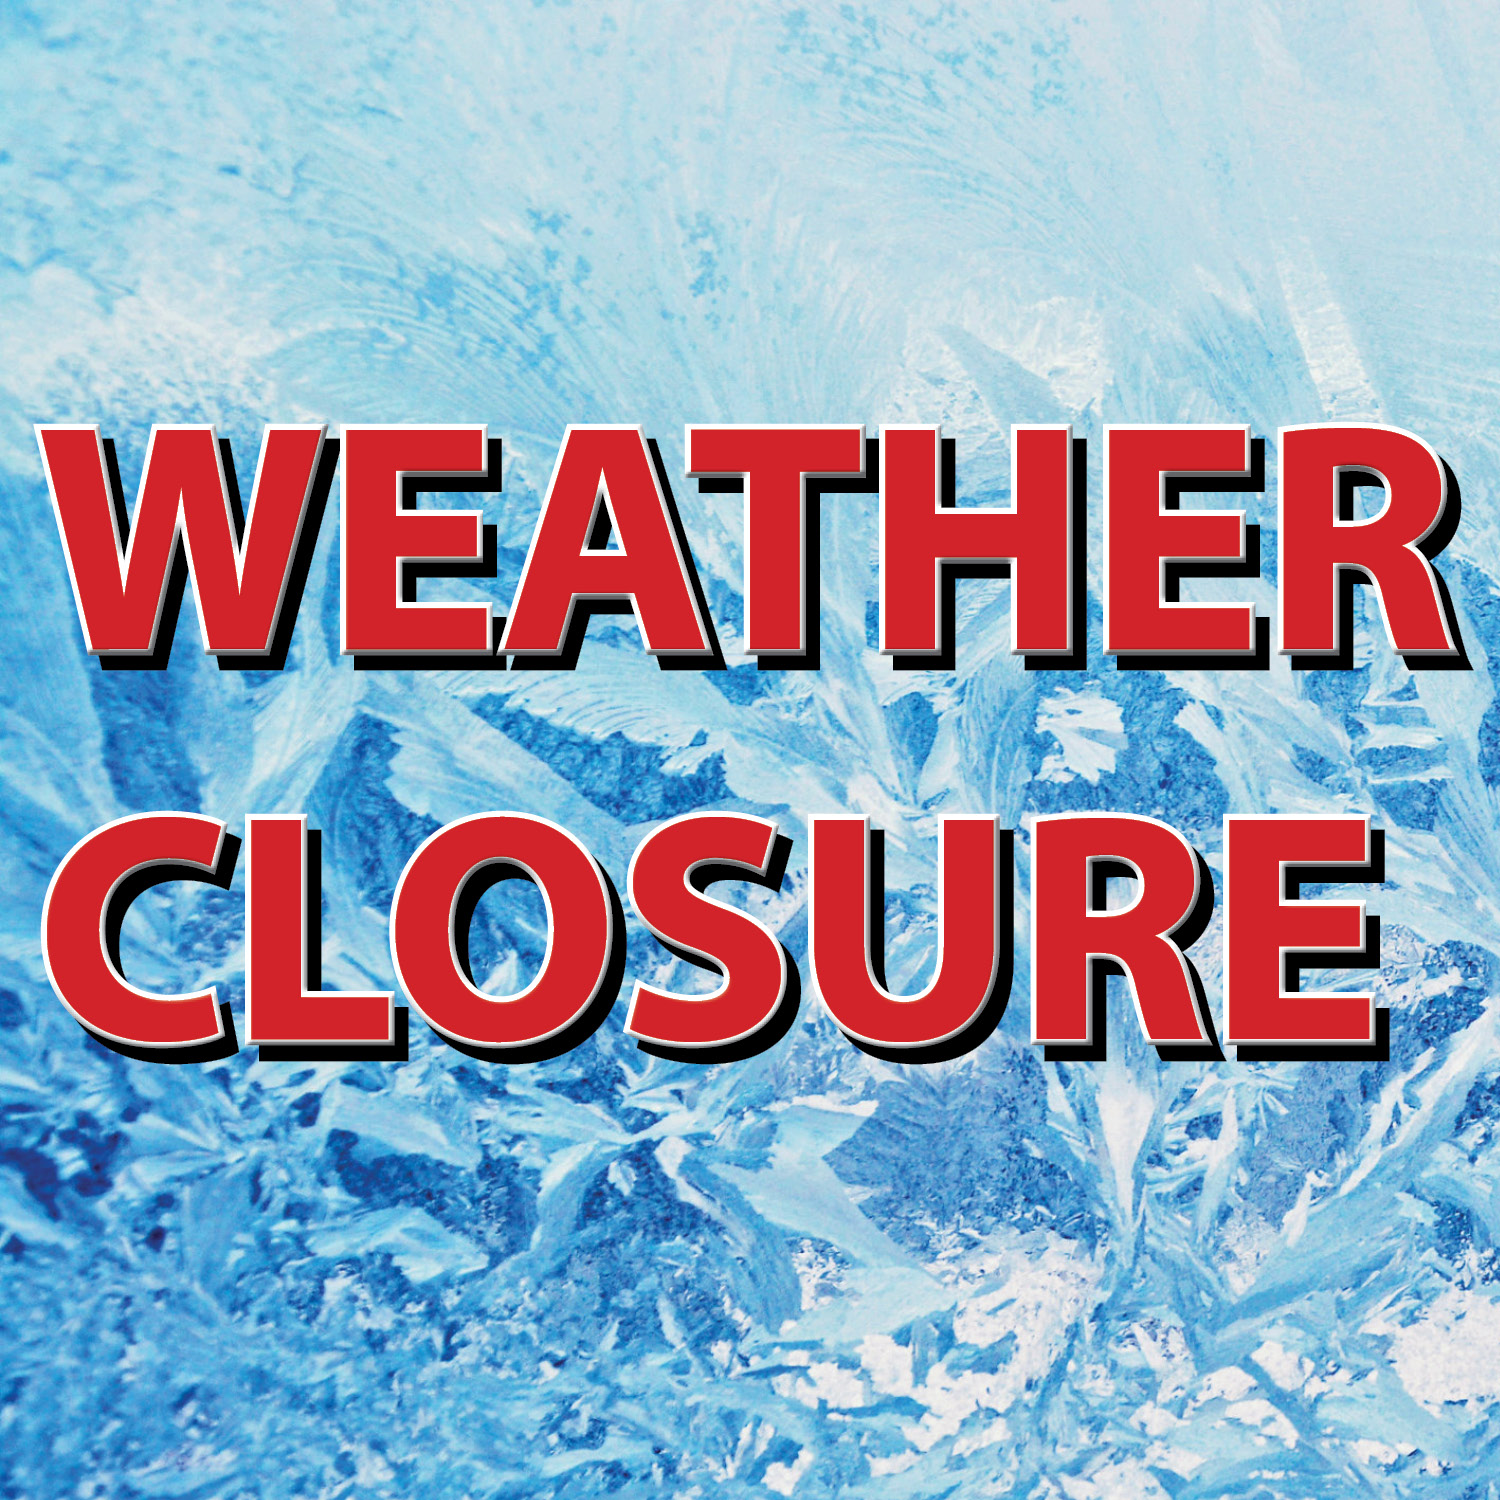 FDLPL will close at noon today (2/22) due to winter weather